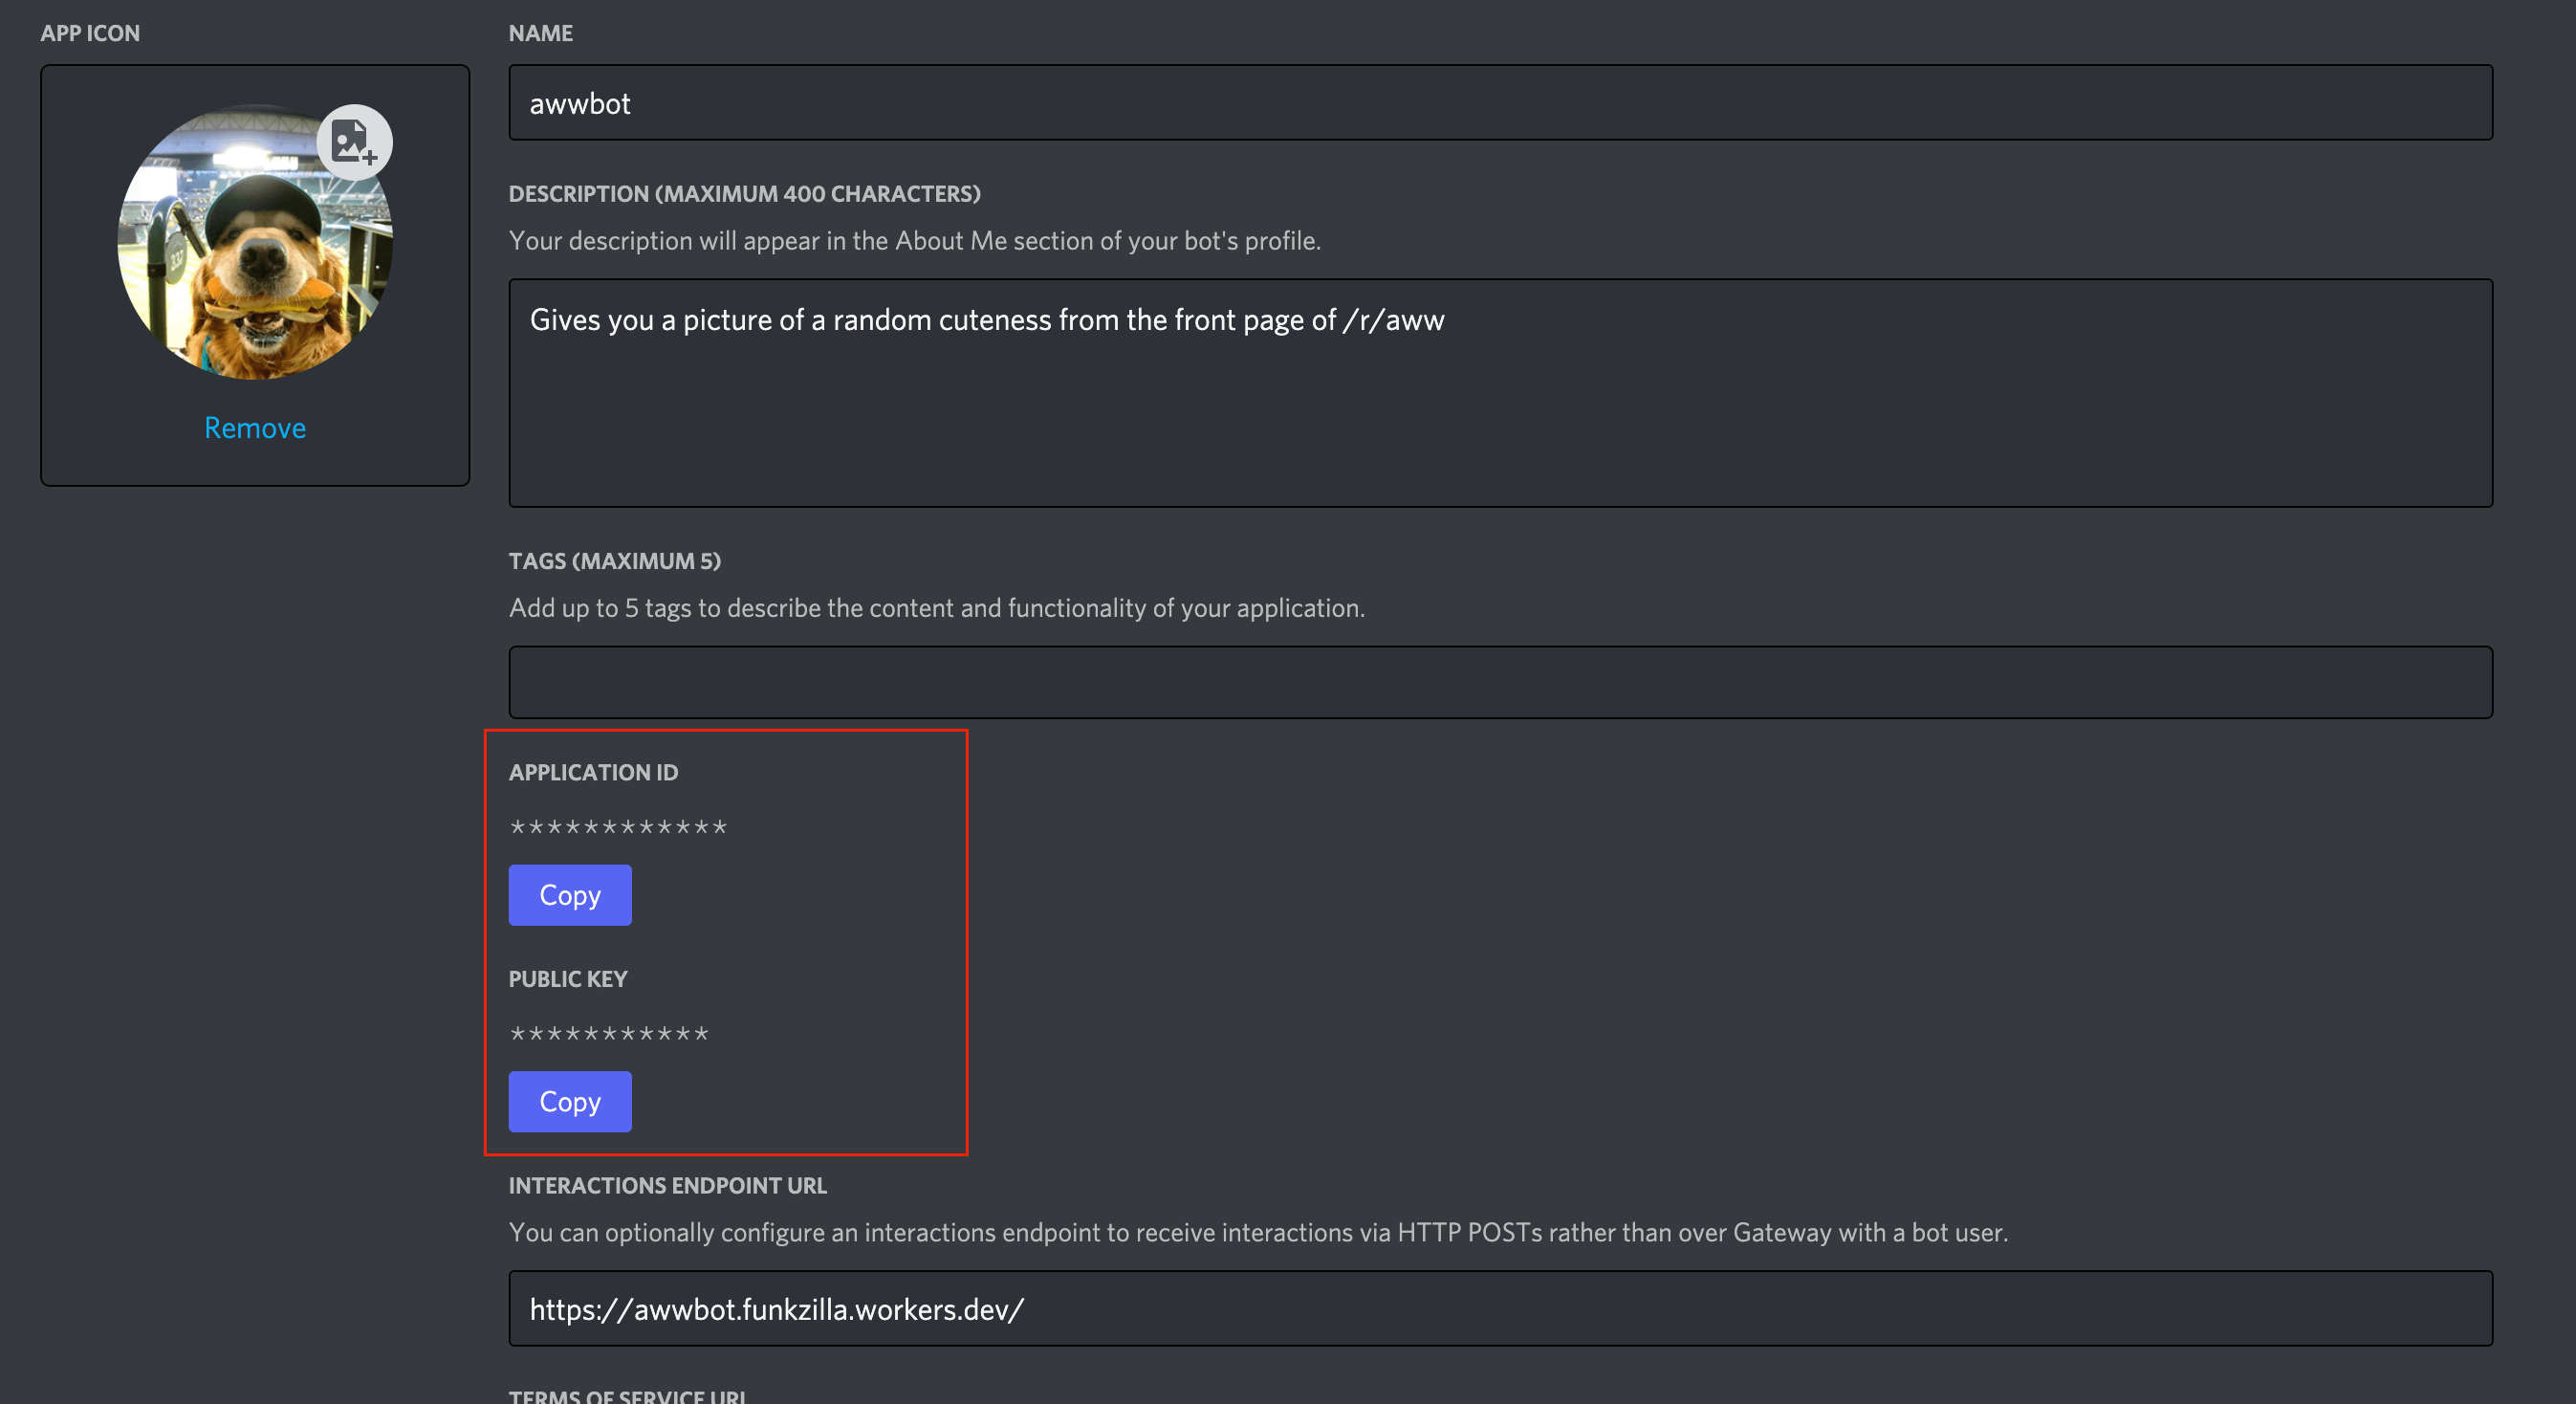 How To] Building a Simple Discord Bot using DiscordGo